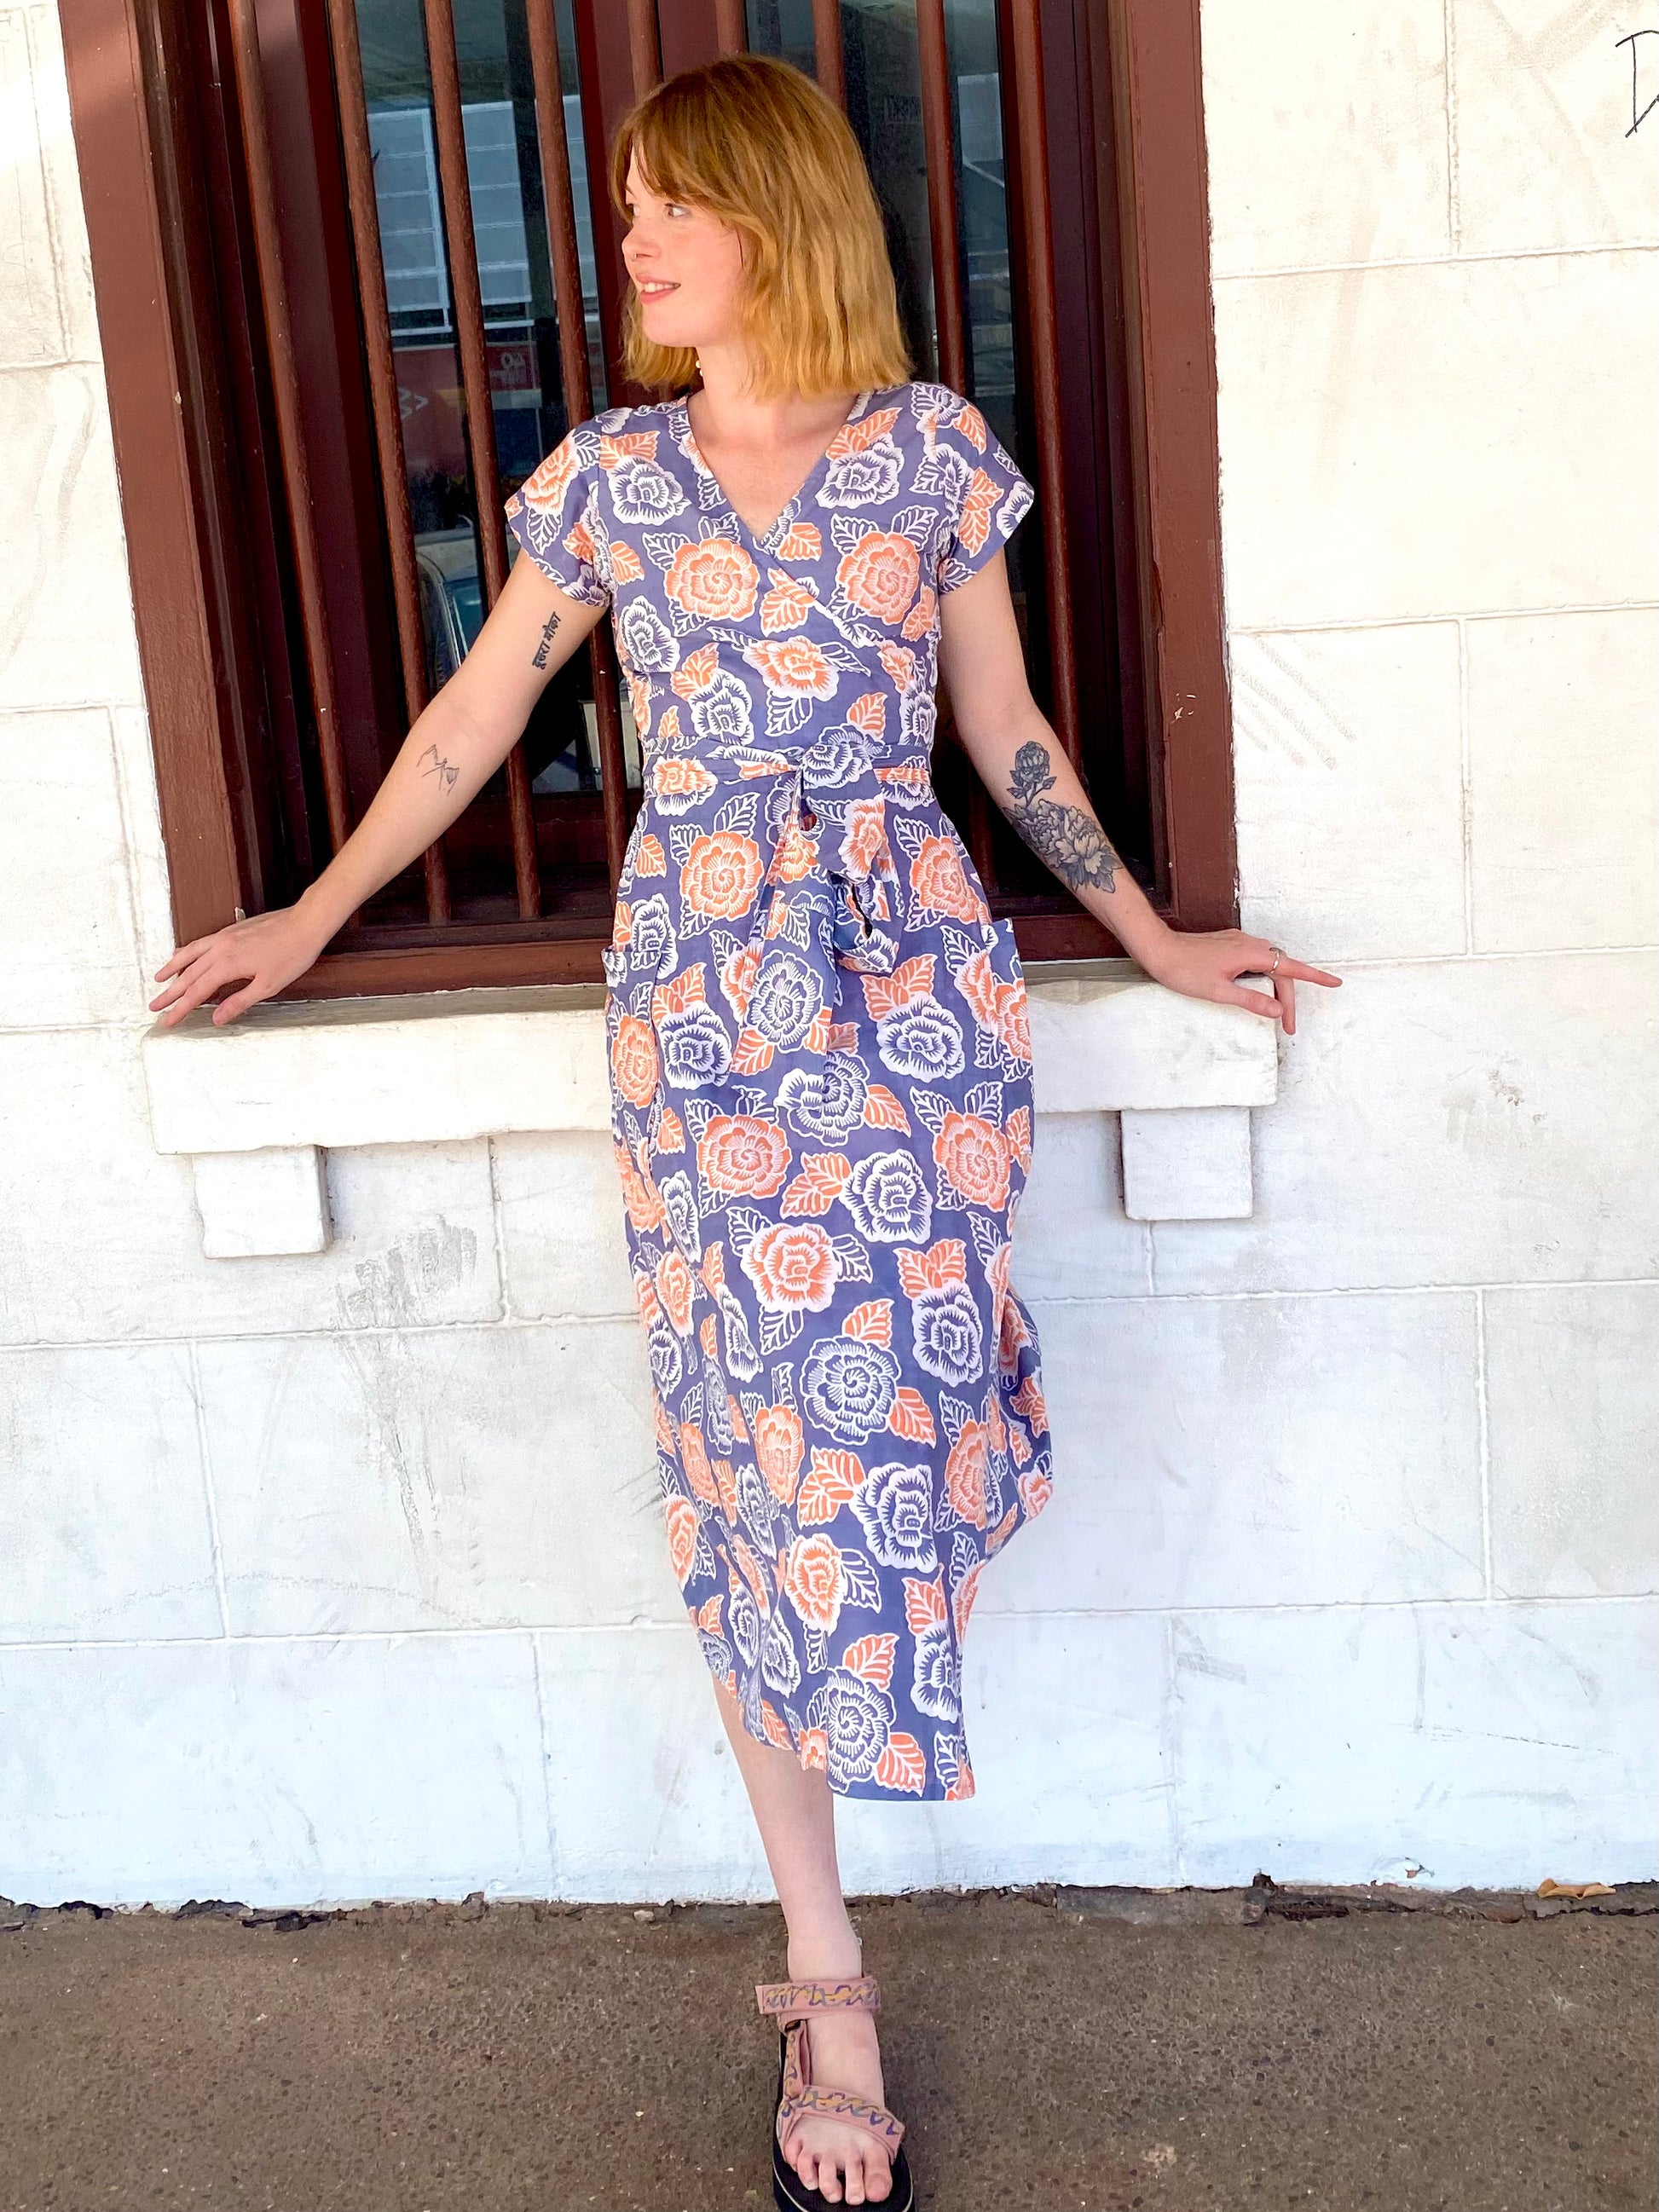 Radiant Wrap Dress in Apricot and Steel Blue Floral Print - Ginger Pink Darwin - ethical fashion - darwin clothing shop - darwin clothing store - darwin fashion